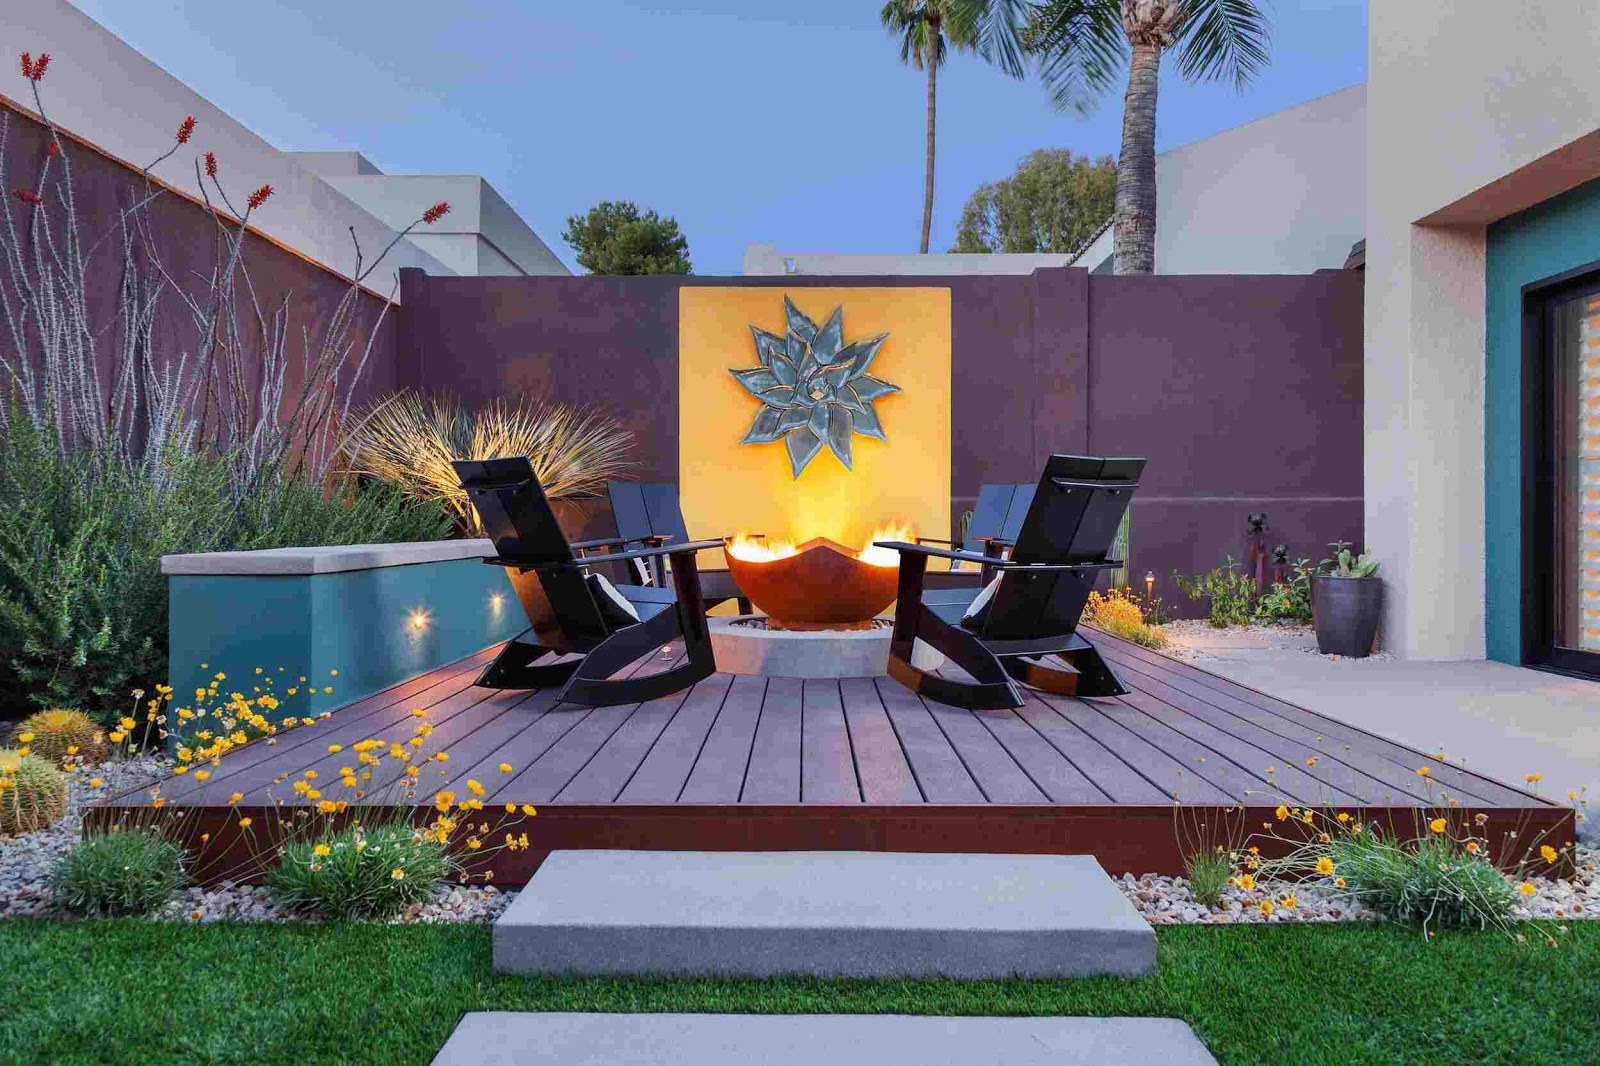 Ways to Decorate Outdoor Walls